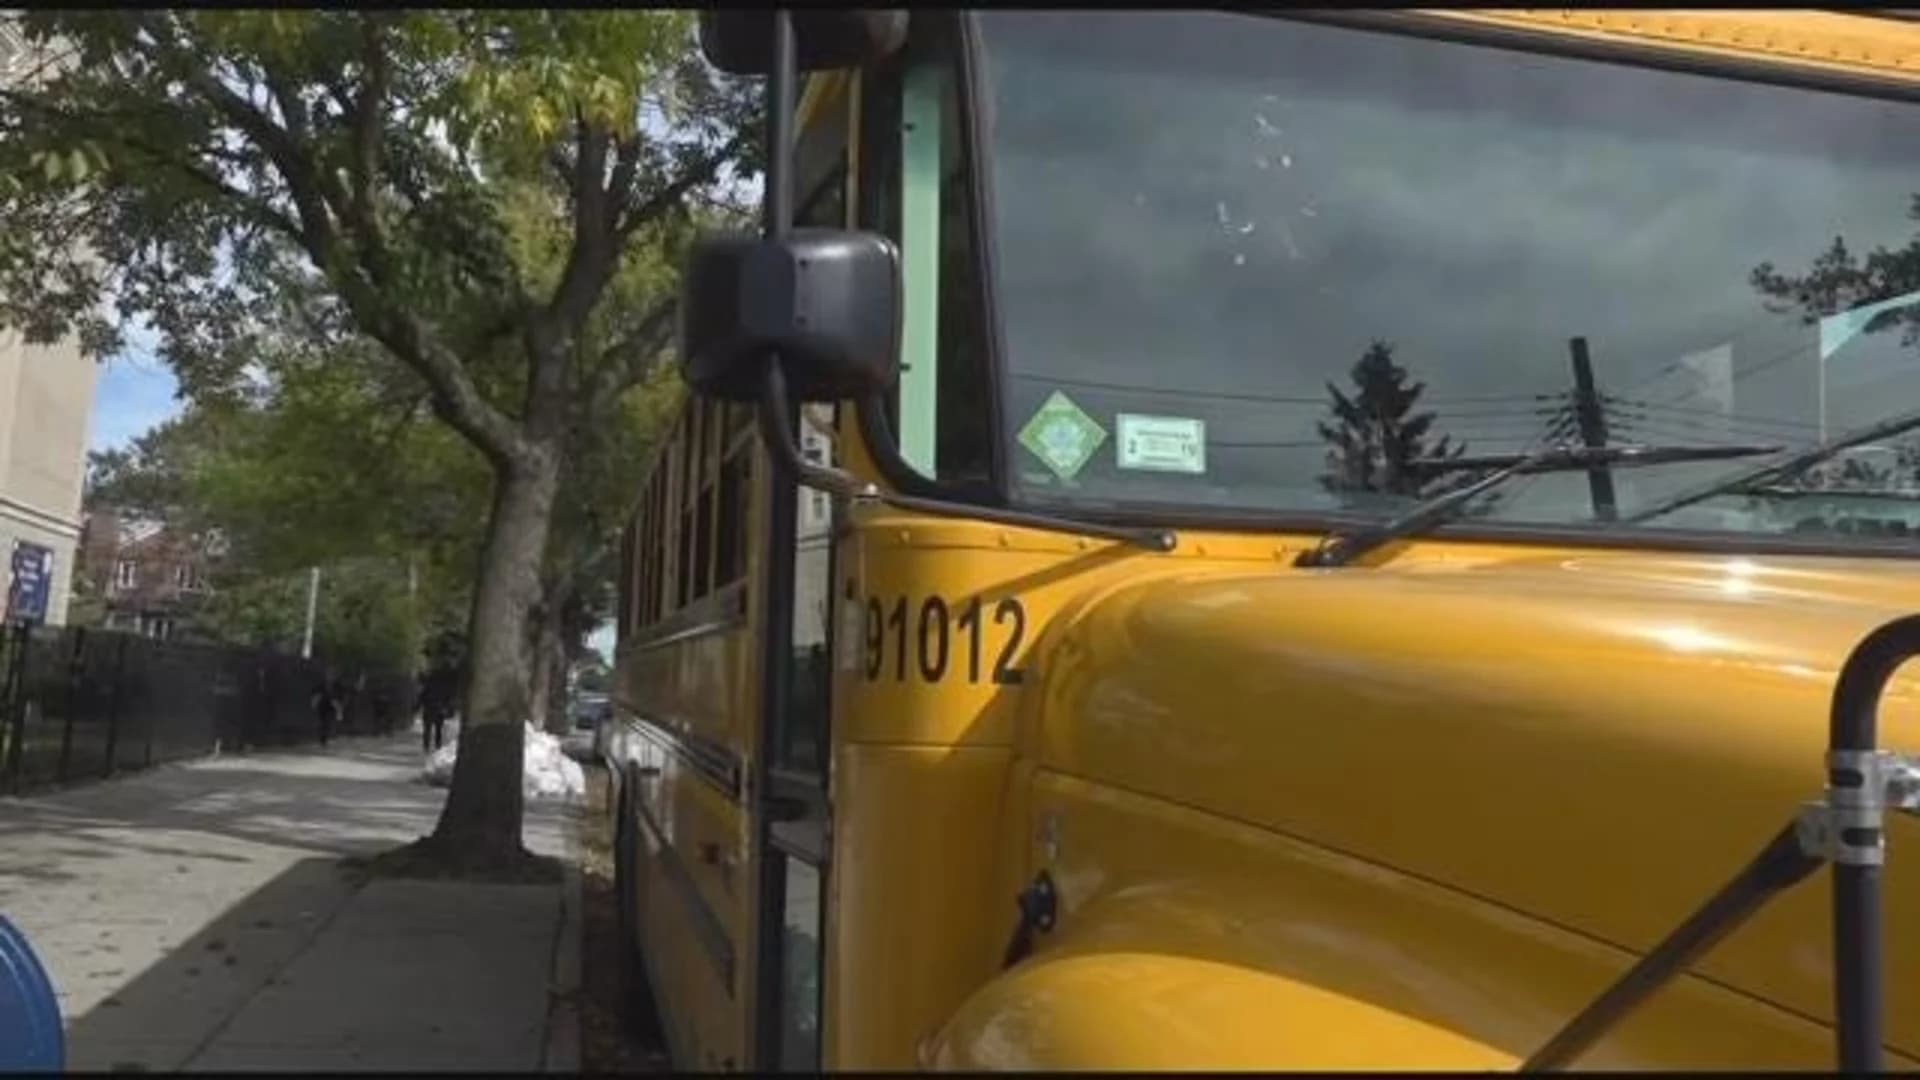 NY lawmakers pass school bus camera bill to catch drivers disregarding “stop” sign